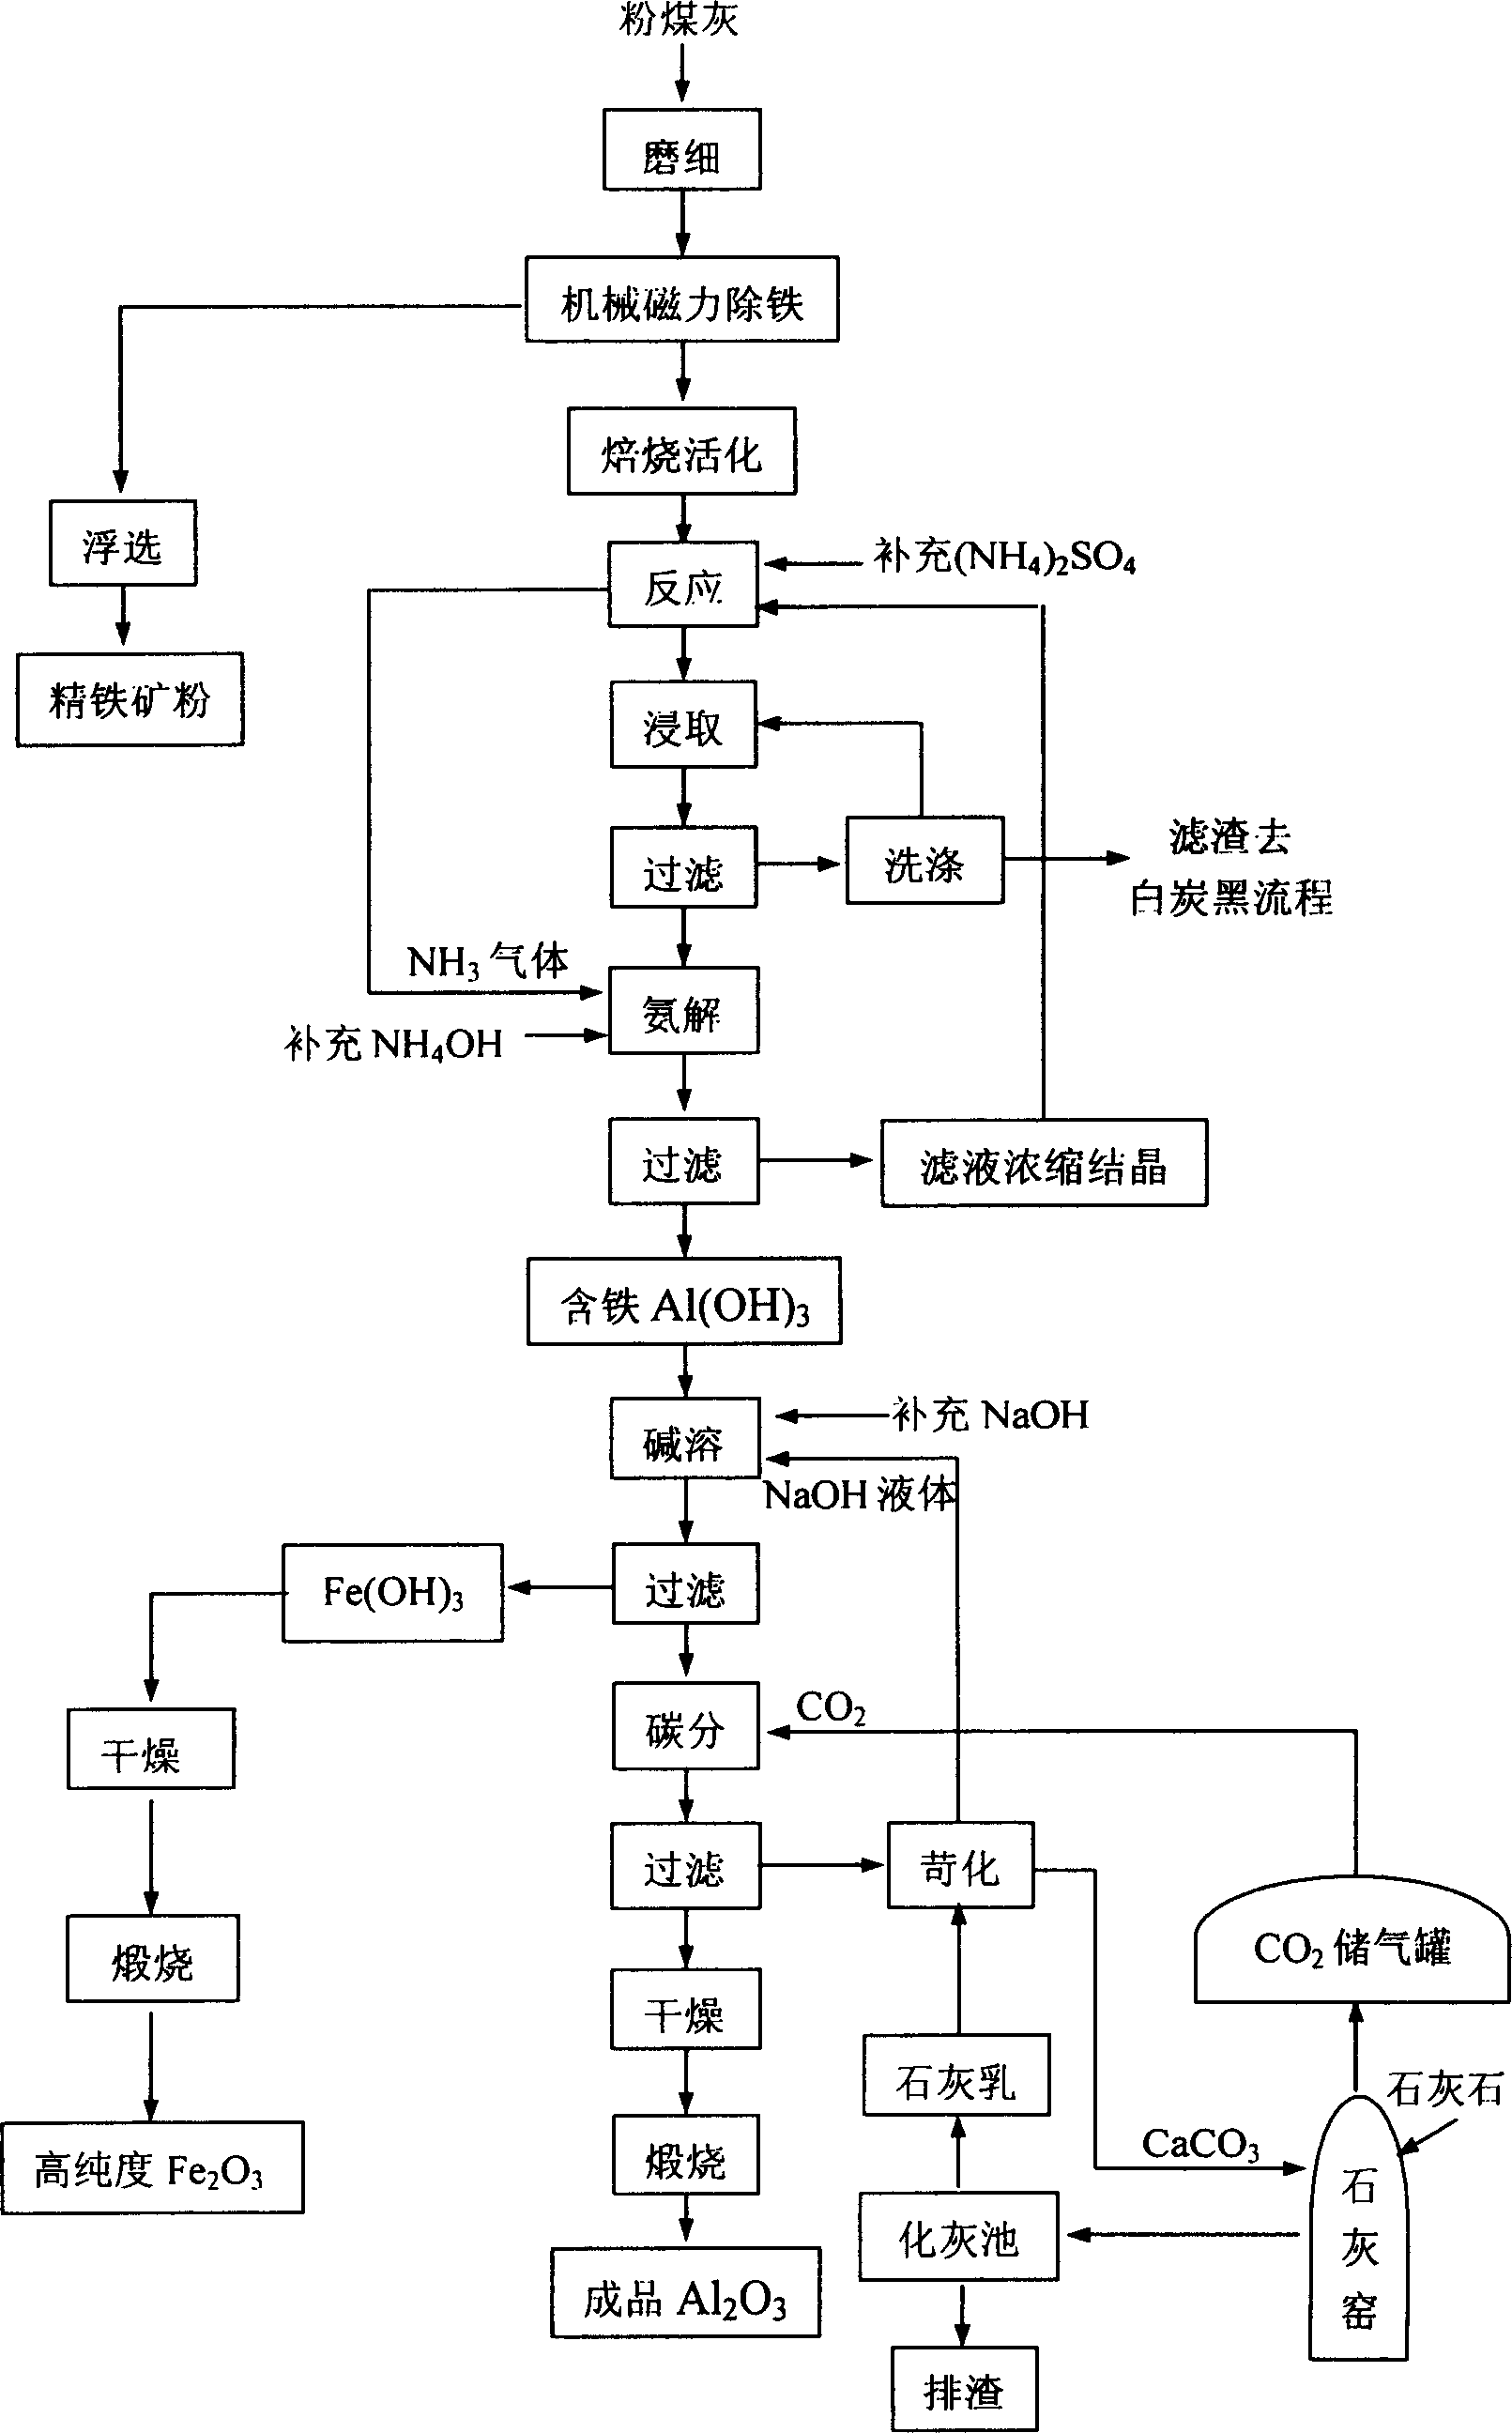 Method of extracting aluminium oxide from fly ash and simultaneously producing white carbon black